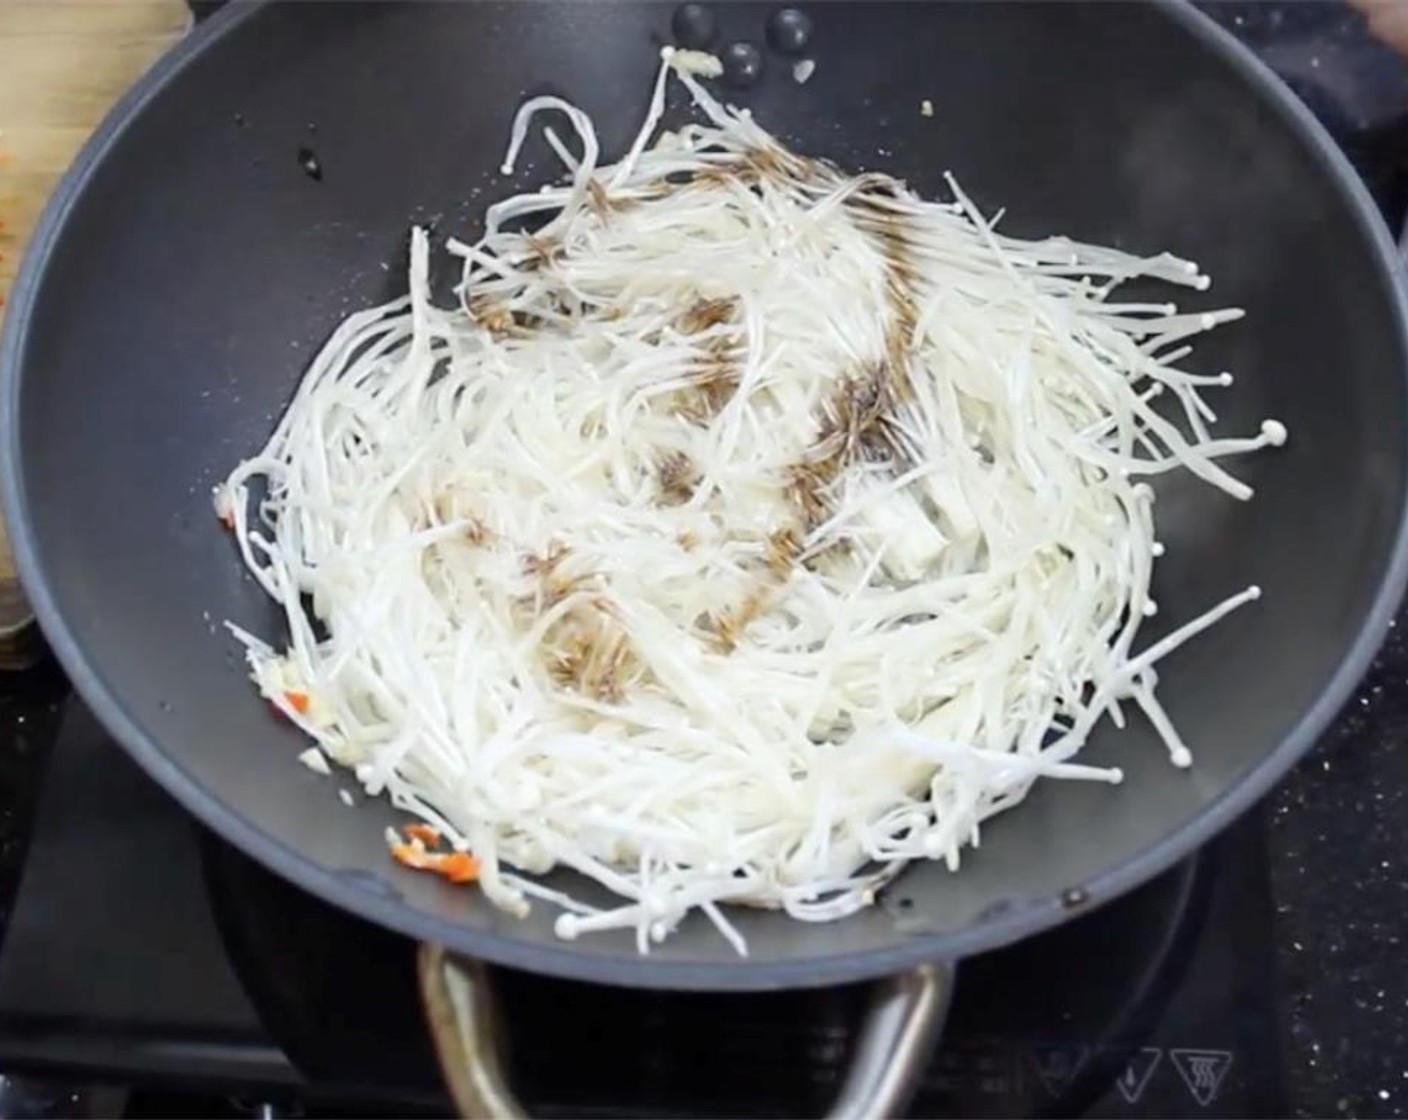 step 5 Add in enoki mushrooms. Drizzle on some Soy Sauce (to taste). Season with Salt (to taste) and Ground Black Pepper (to taste). Saute until water from mushrooms is released.